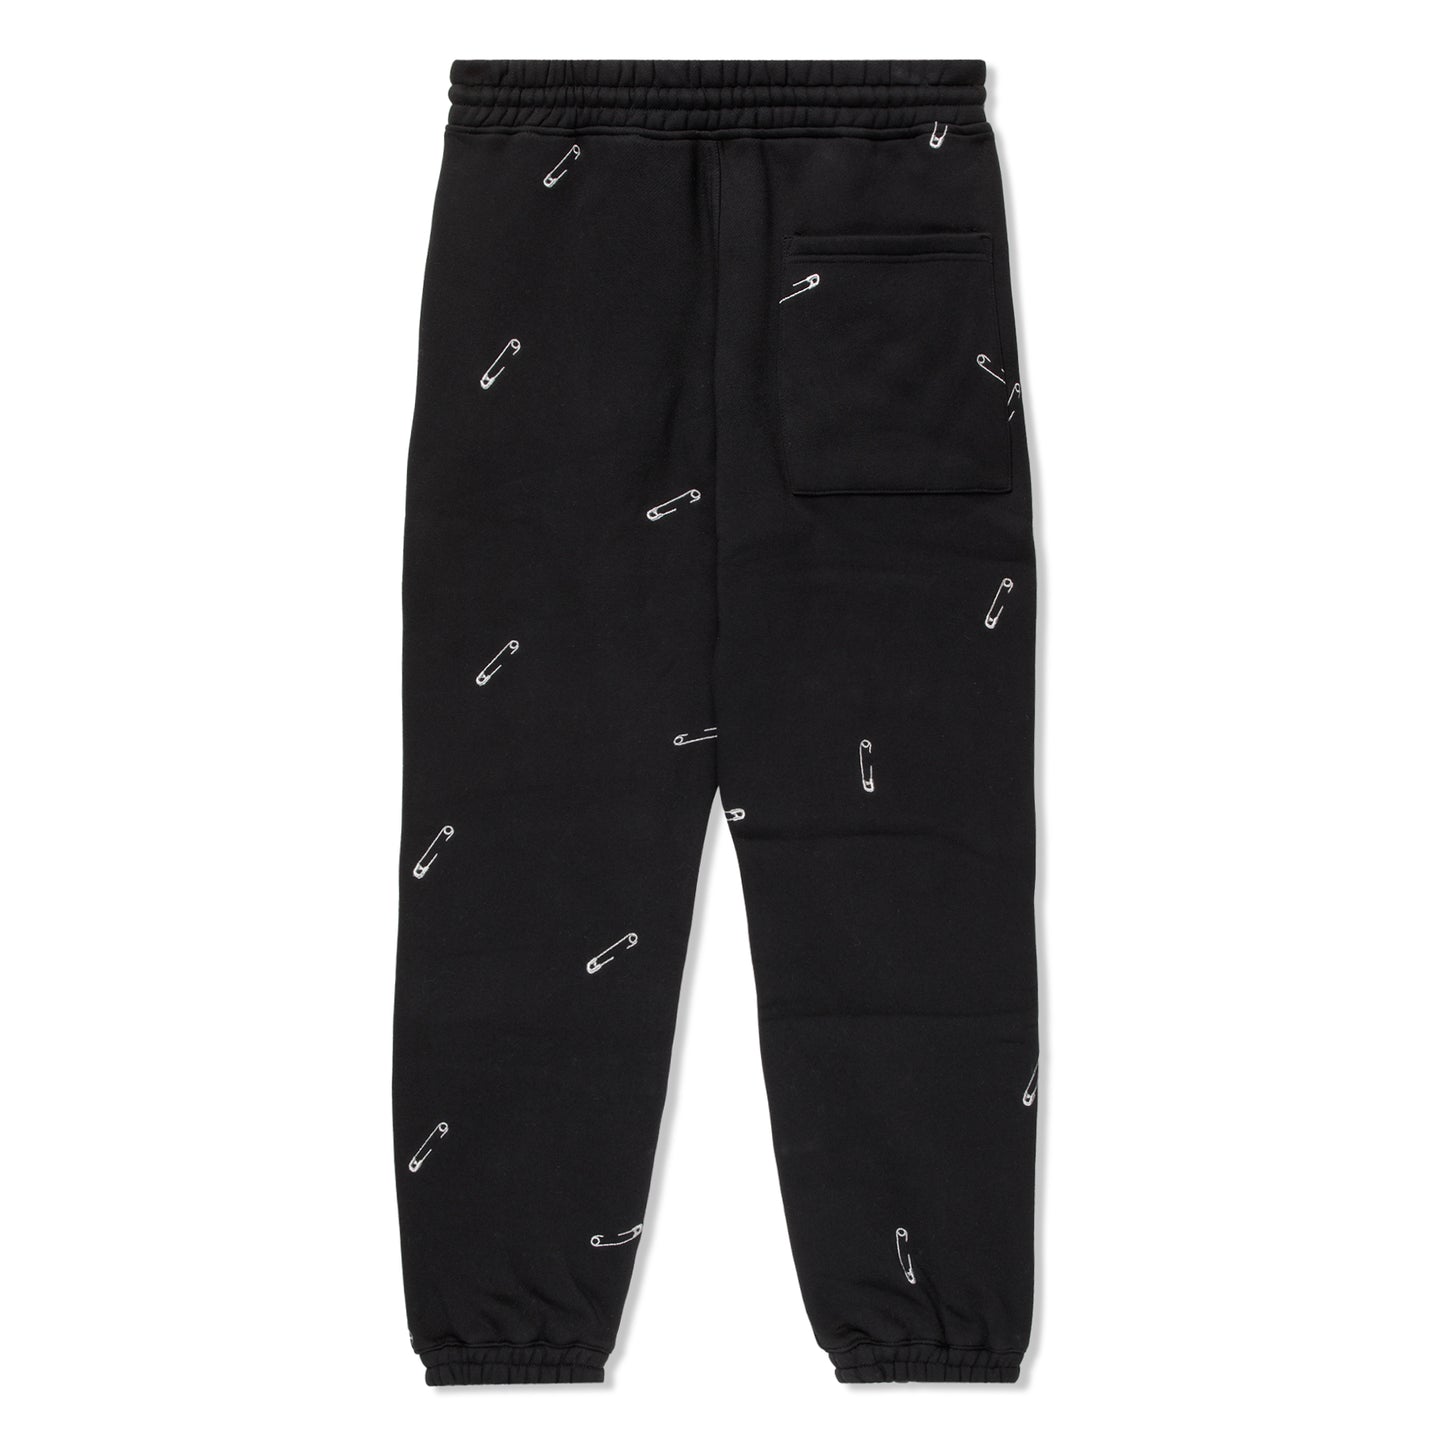 Pleasures Safety Embroidered Sweat Pant (Black)